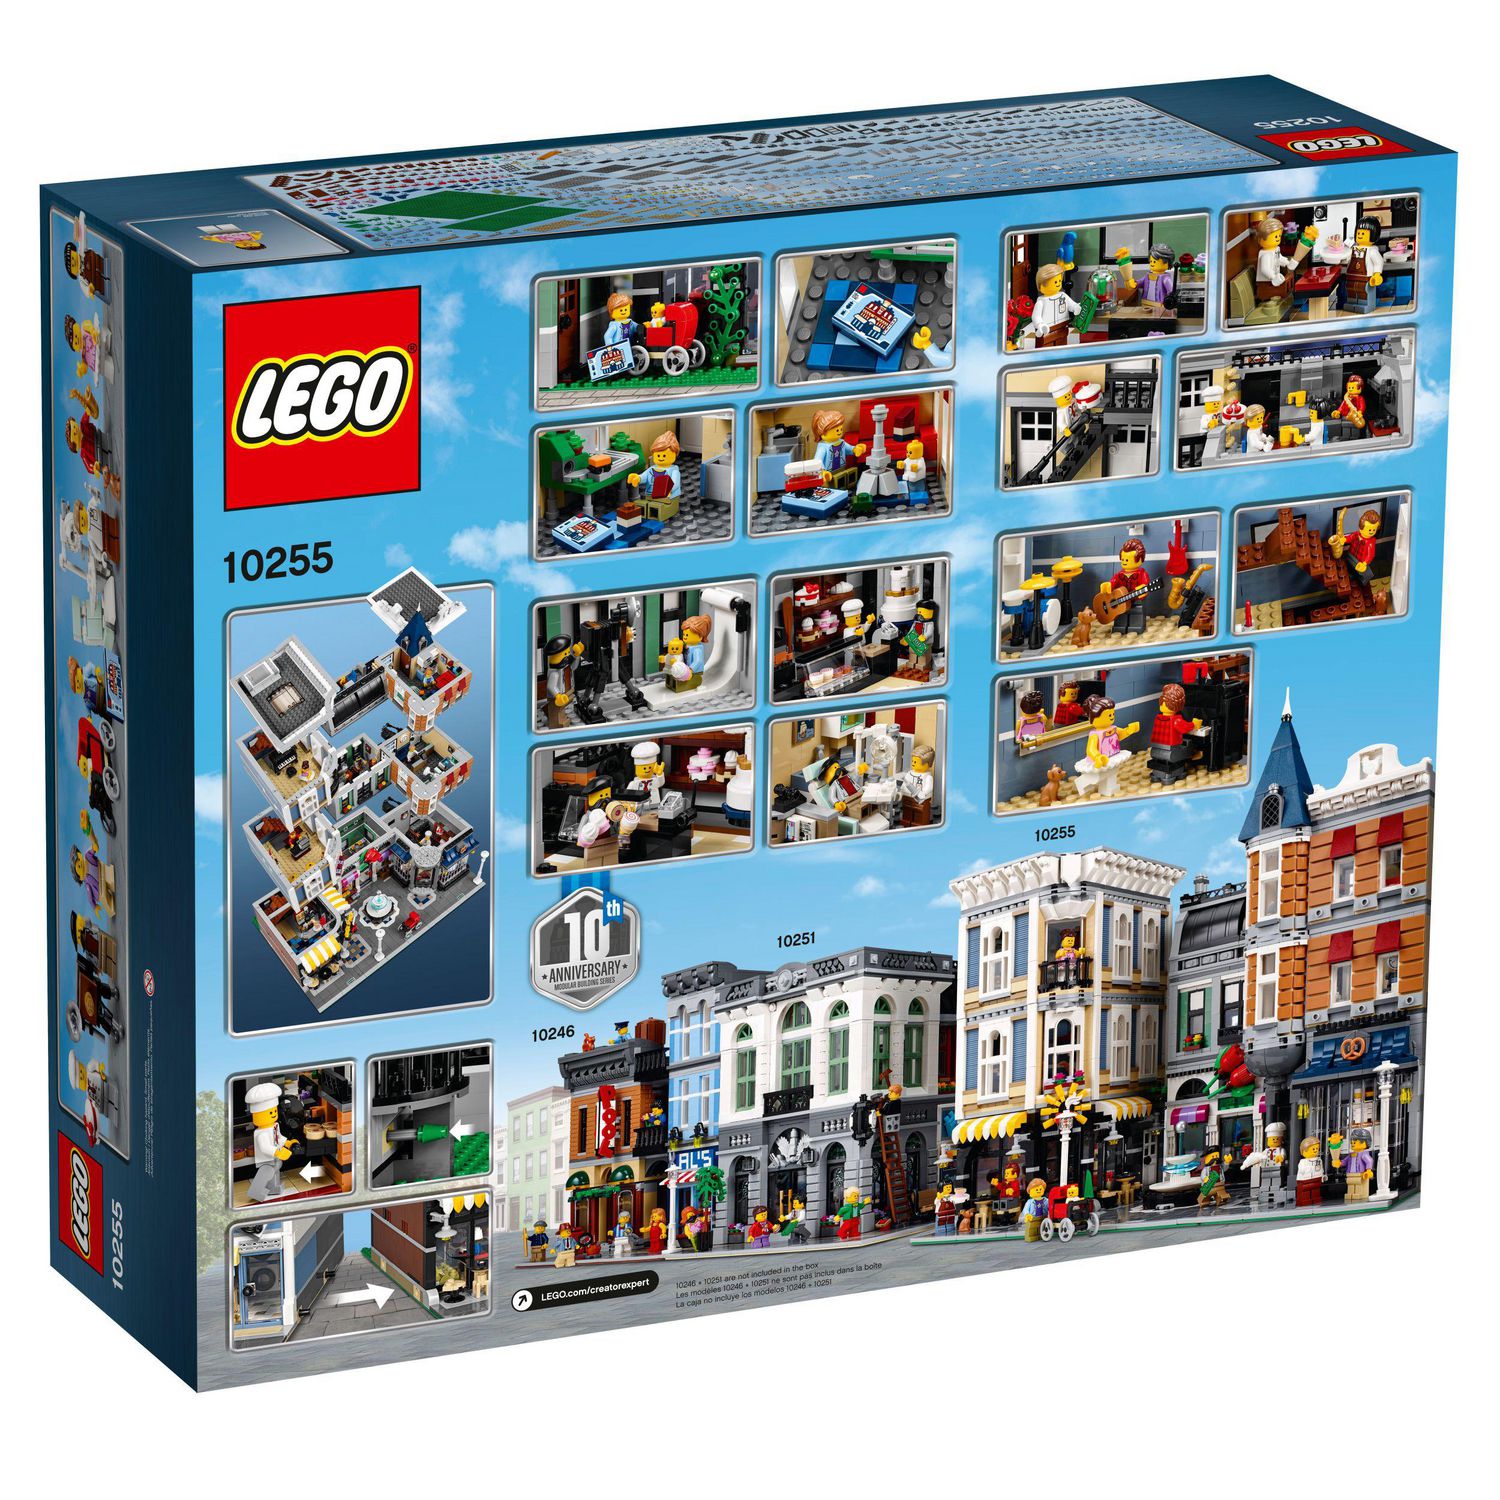 LEGO Creator Expert Assembly Square (10255)